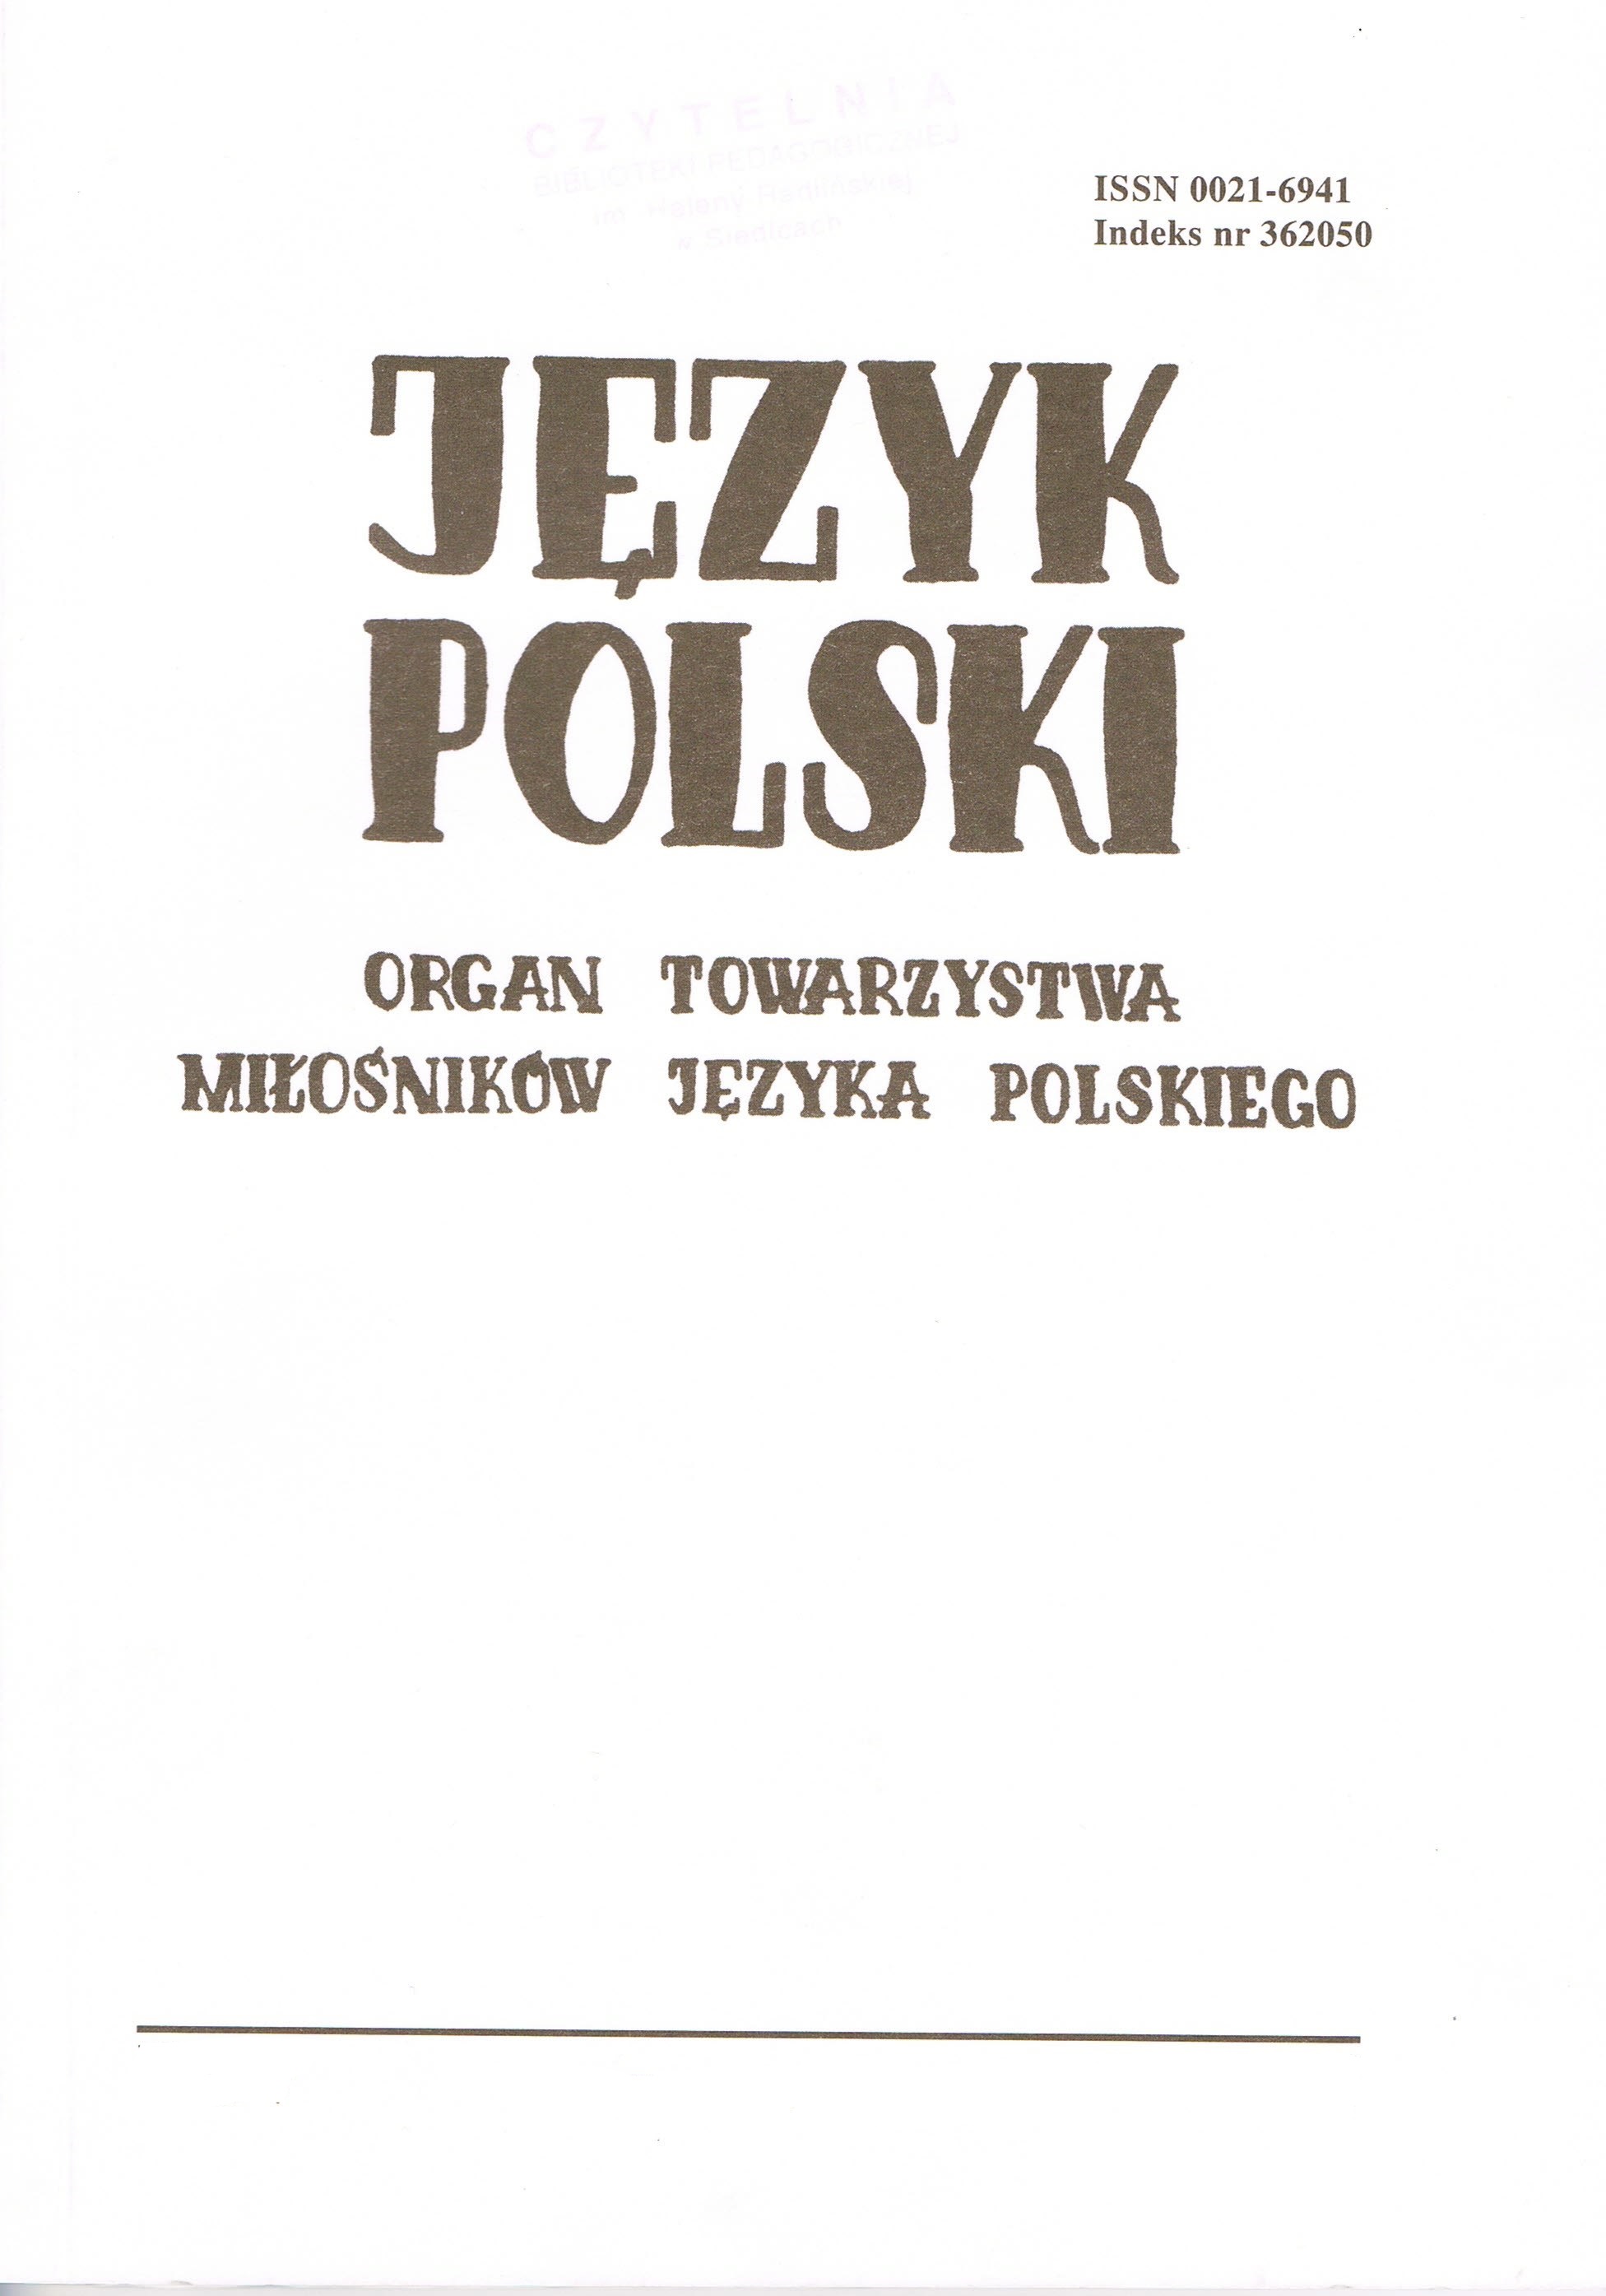 A report on the activities of the Society of Friends of the Polish Language Cover Image